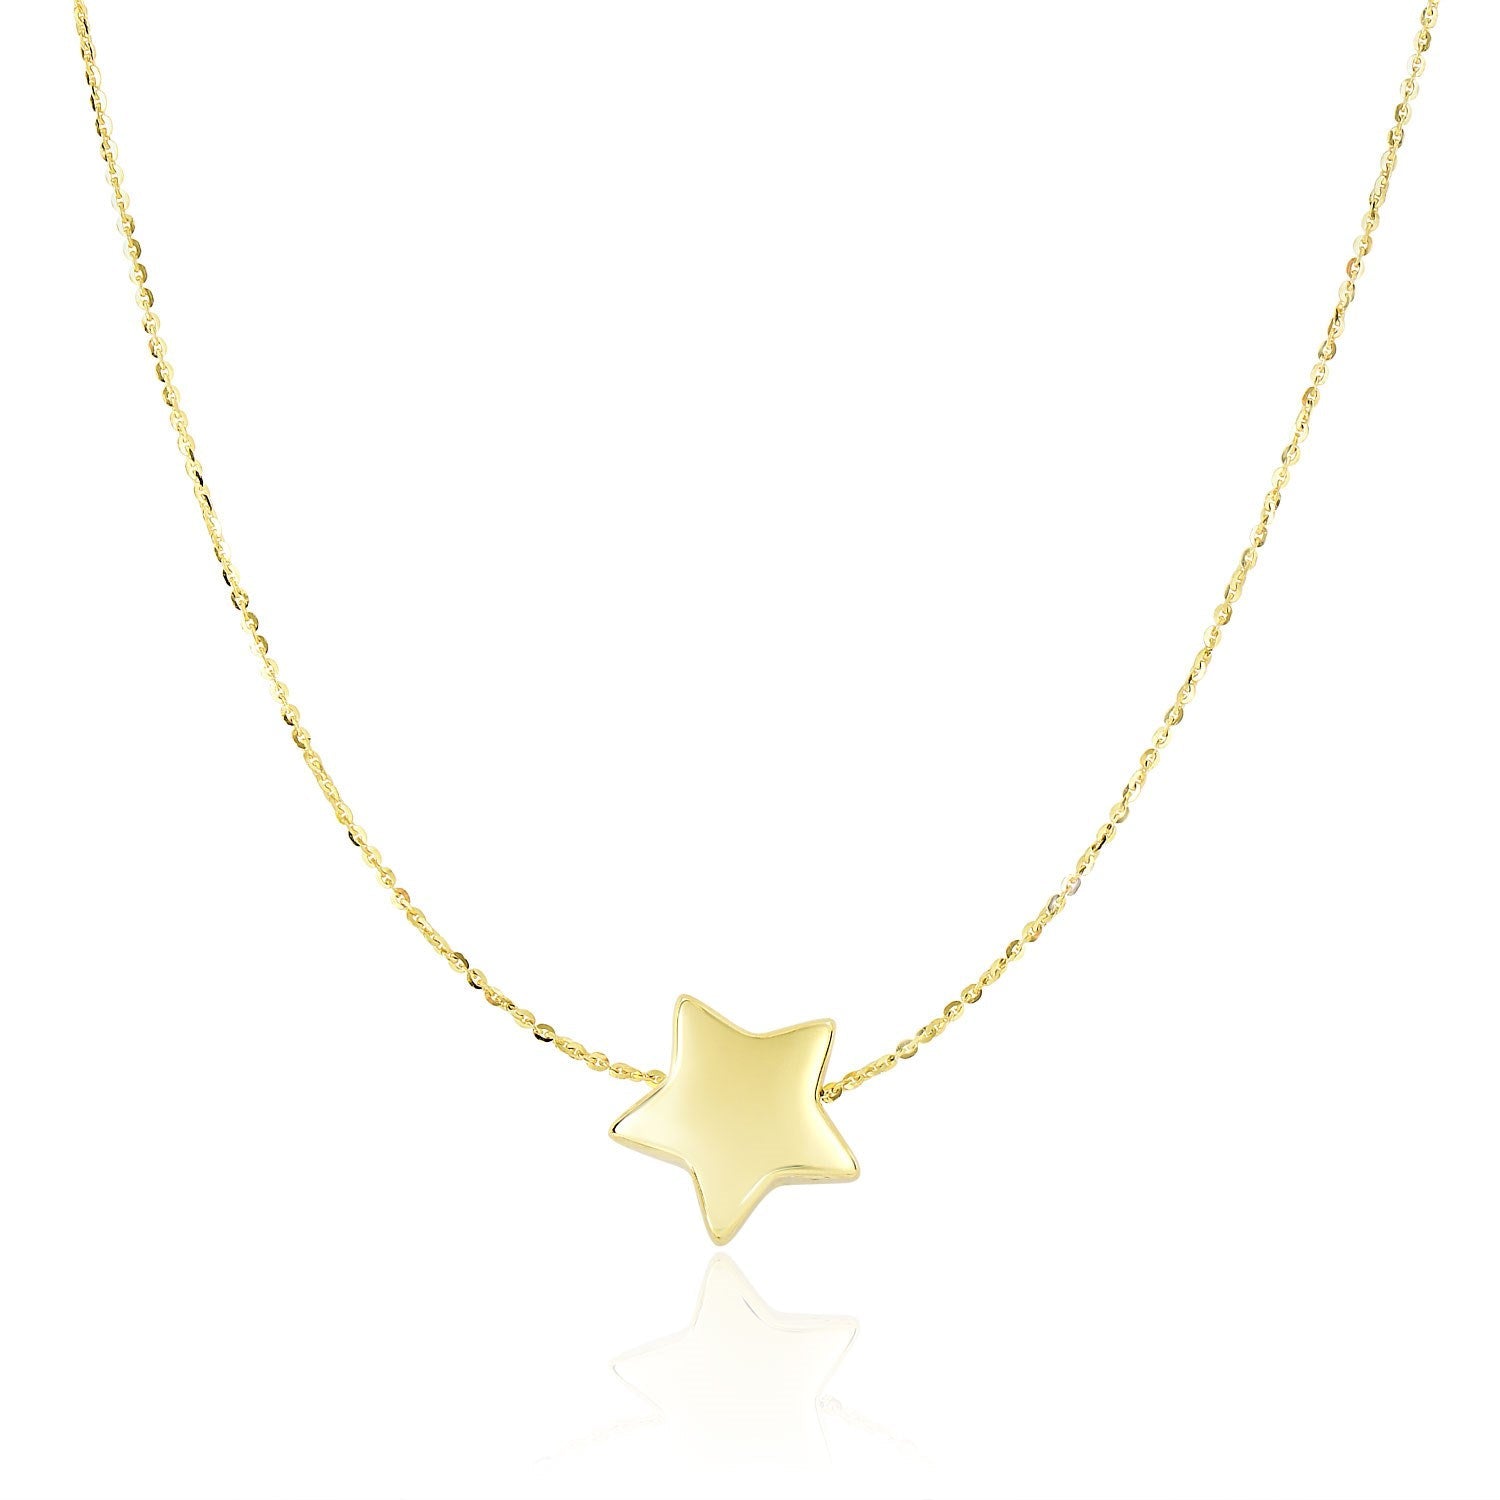 14k Yellow Gold Necklace with Shiny Puffed Sliding Star Charm - LinkagejewelrydesignLinkagejewelrydesign